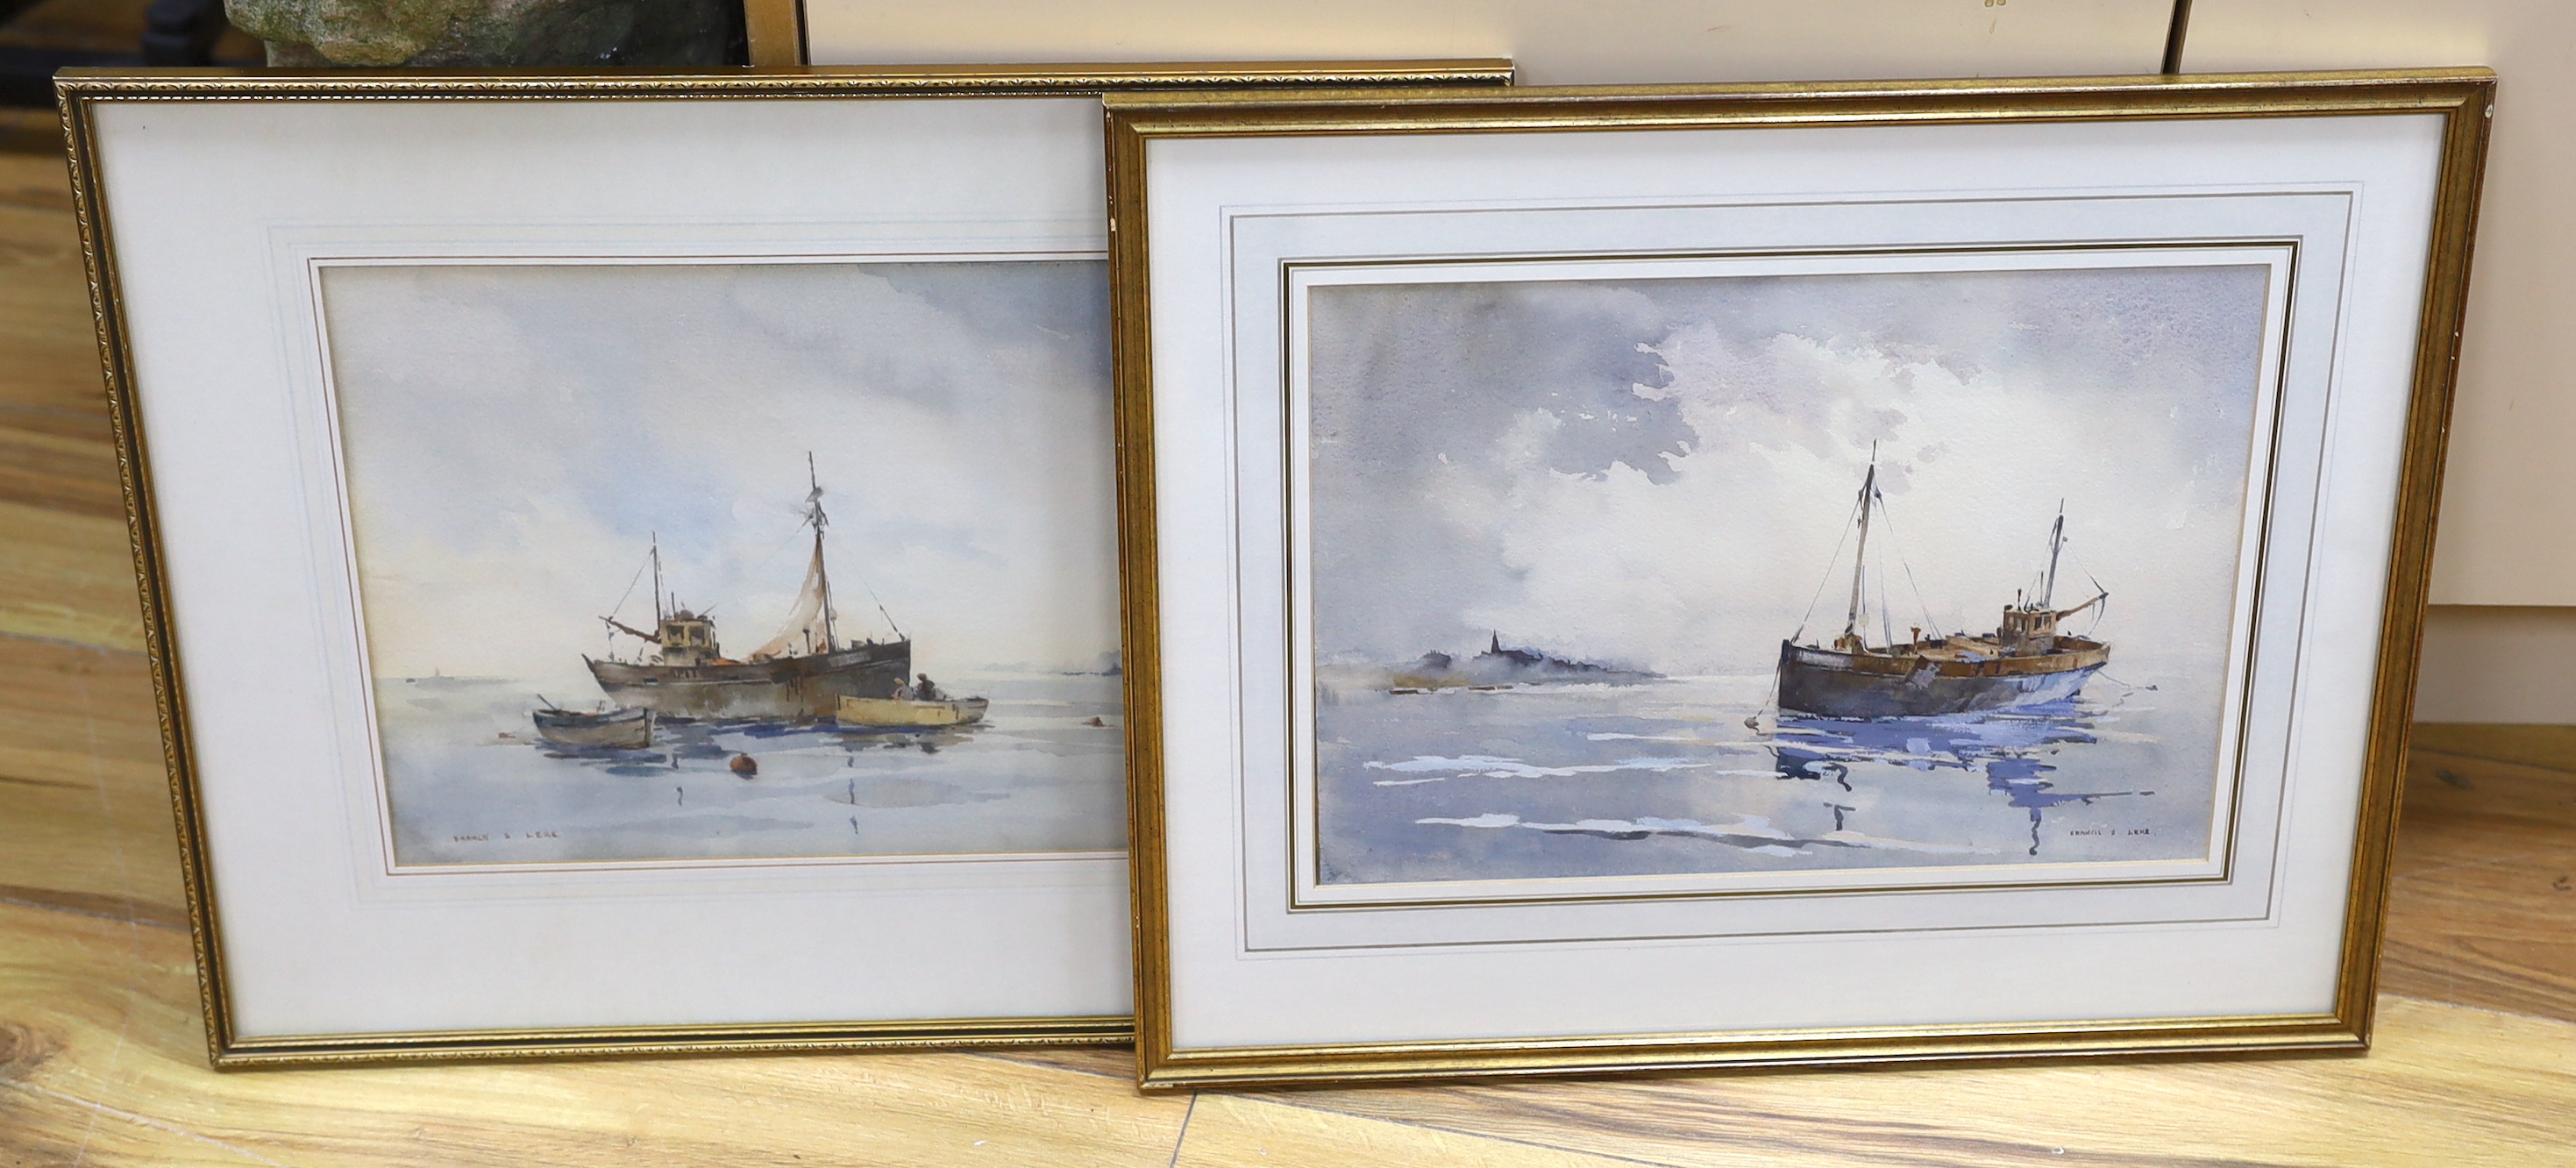 Francis Leke (b.1912), three maritime interest watercolours, Boats and harbour scenes, each signed, 25 x 35cm